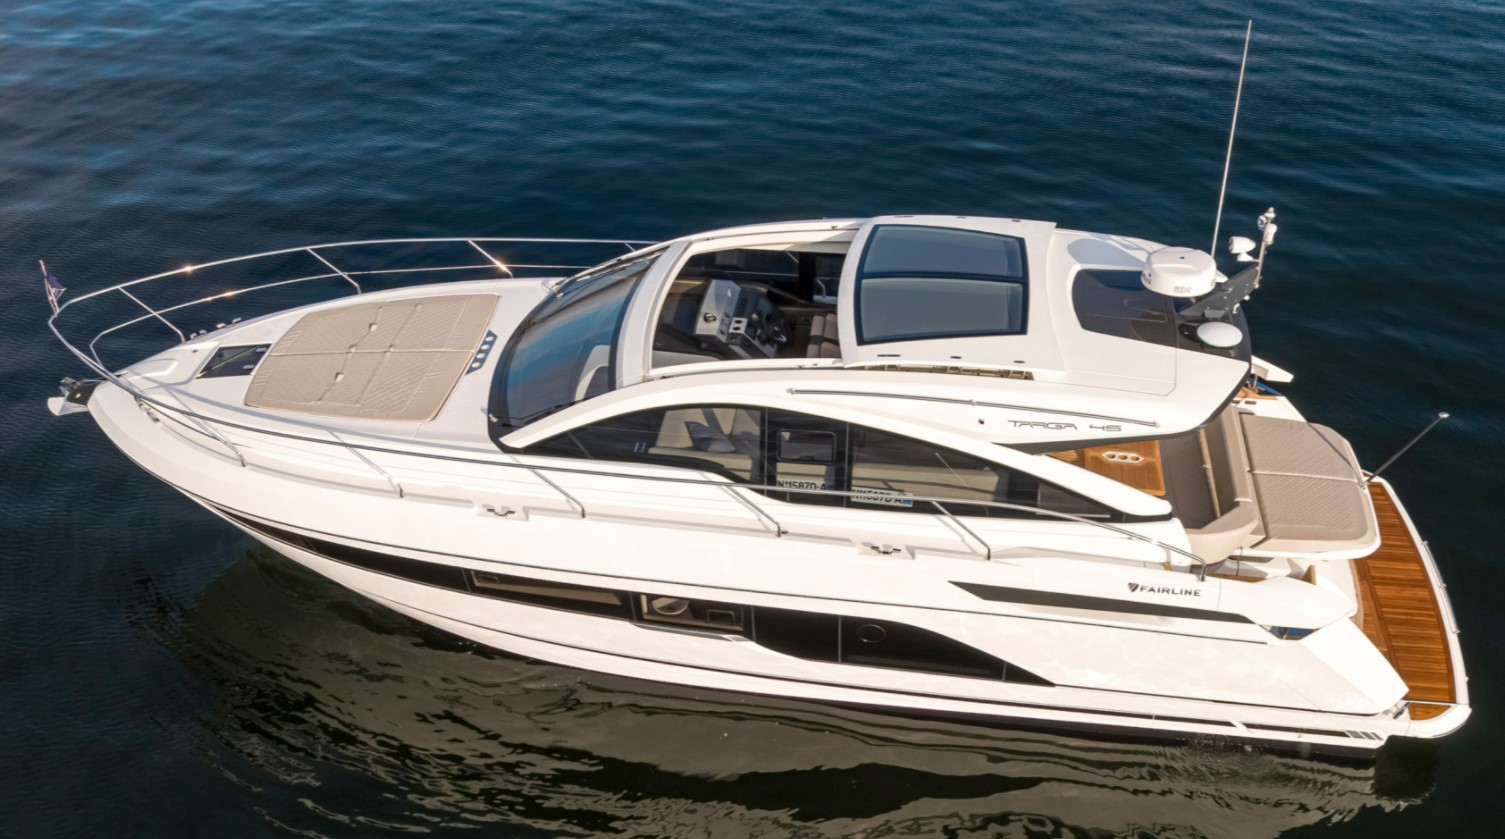 Sell your Fairline through Fairline South West